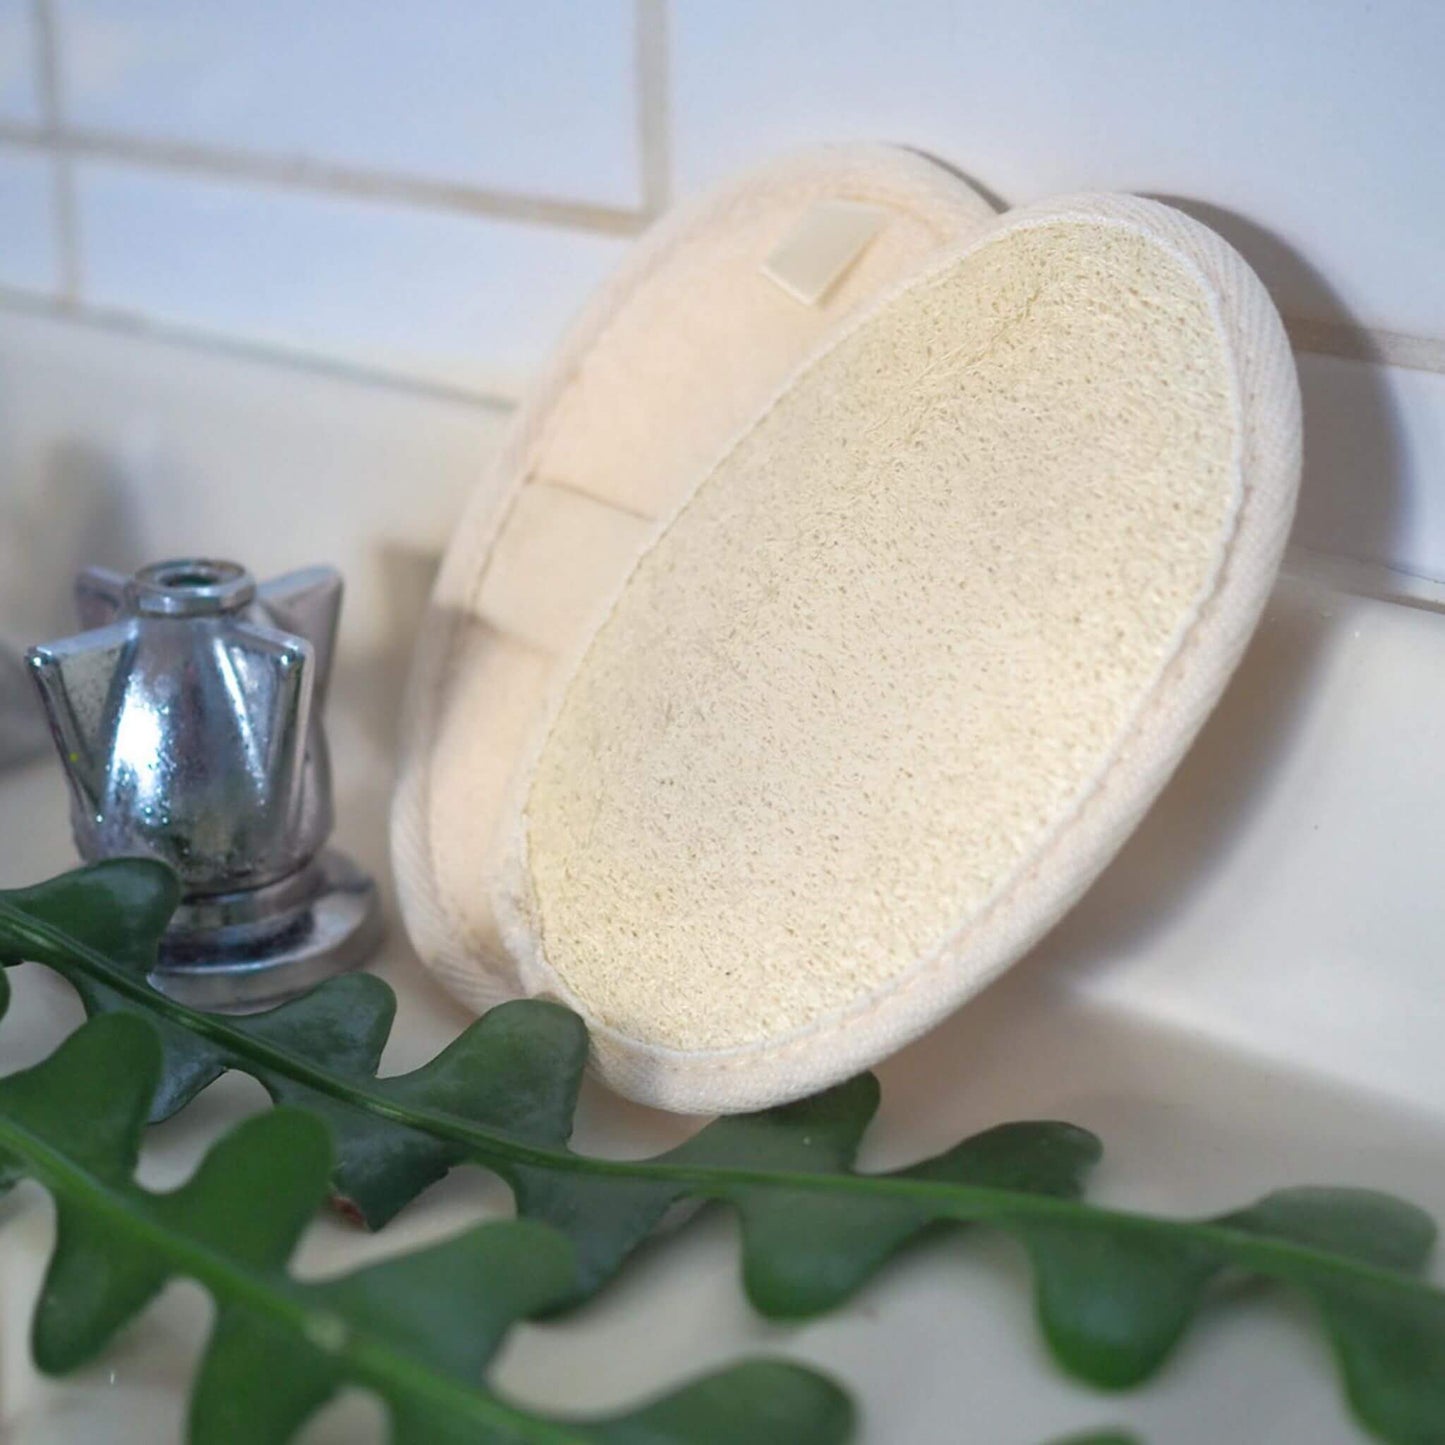 natural loofah body scrub with elastic handle for holding. Sitting on sink with tap and green leaves